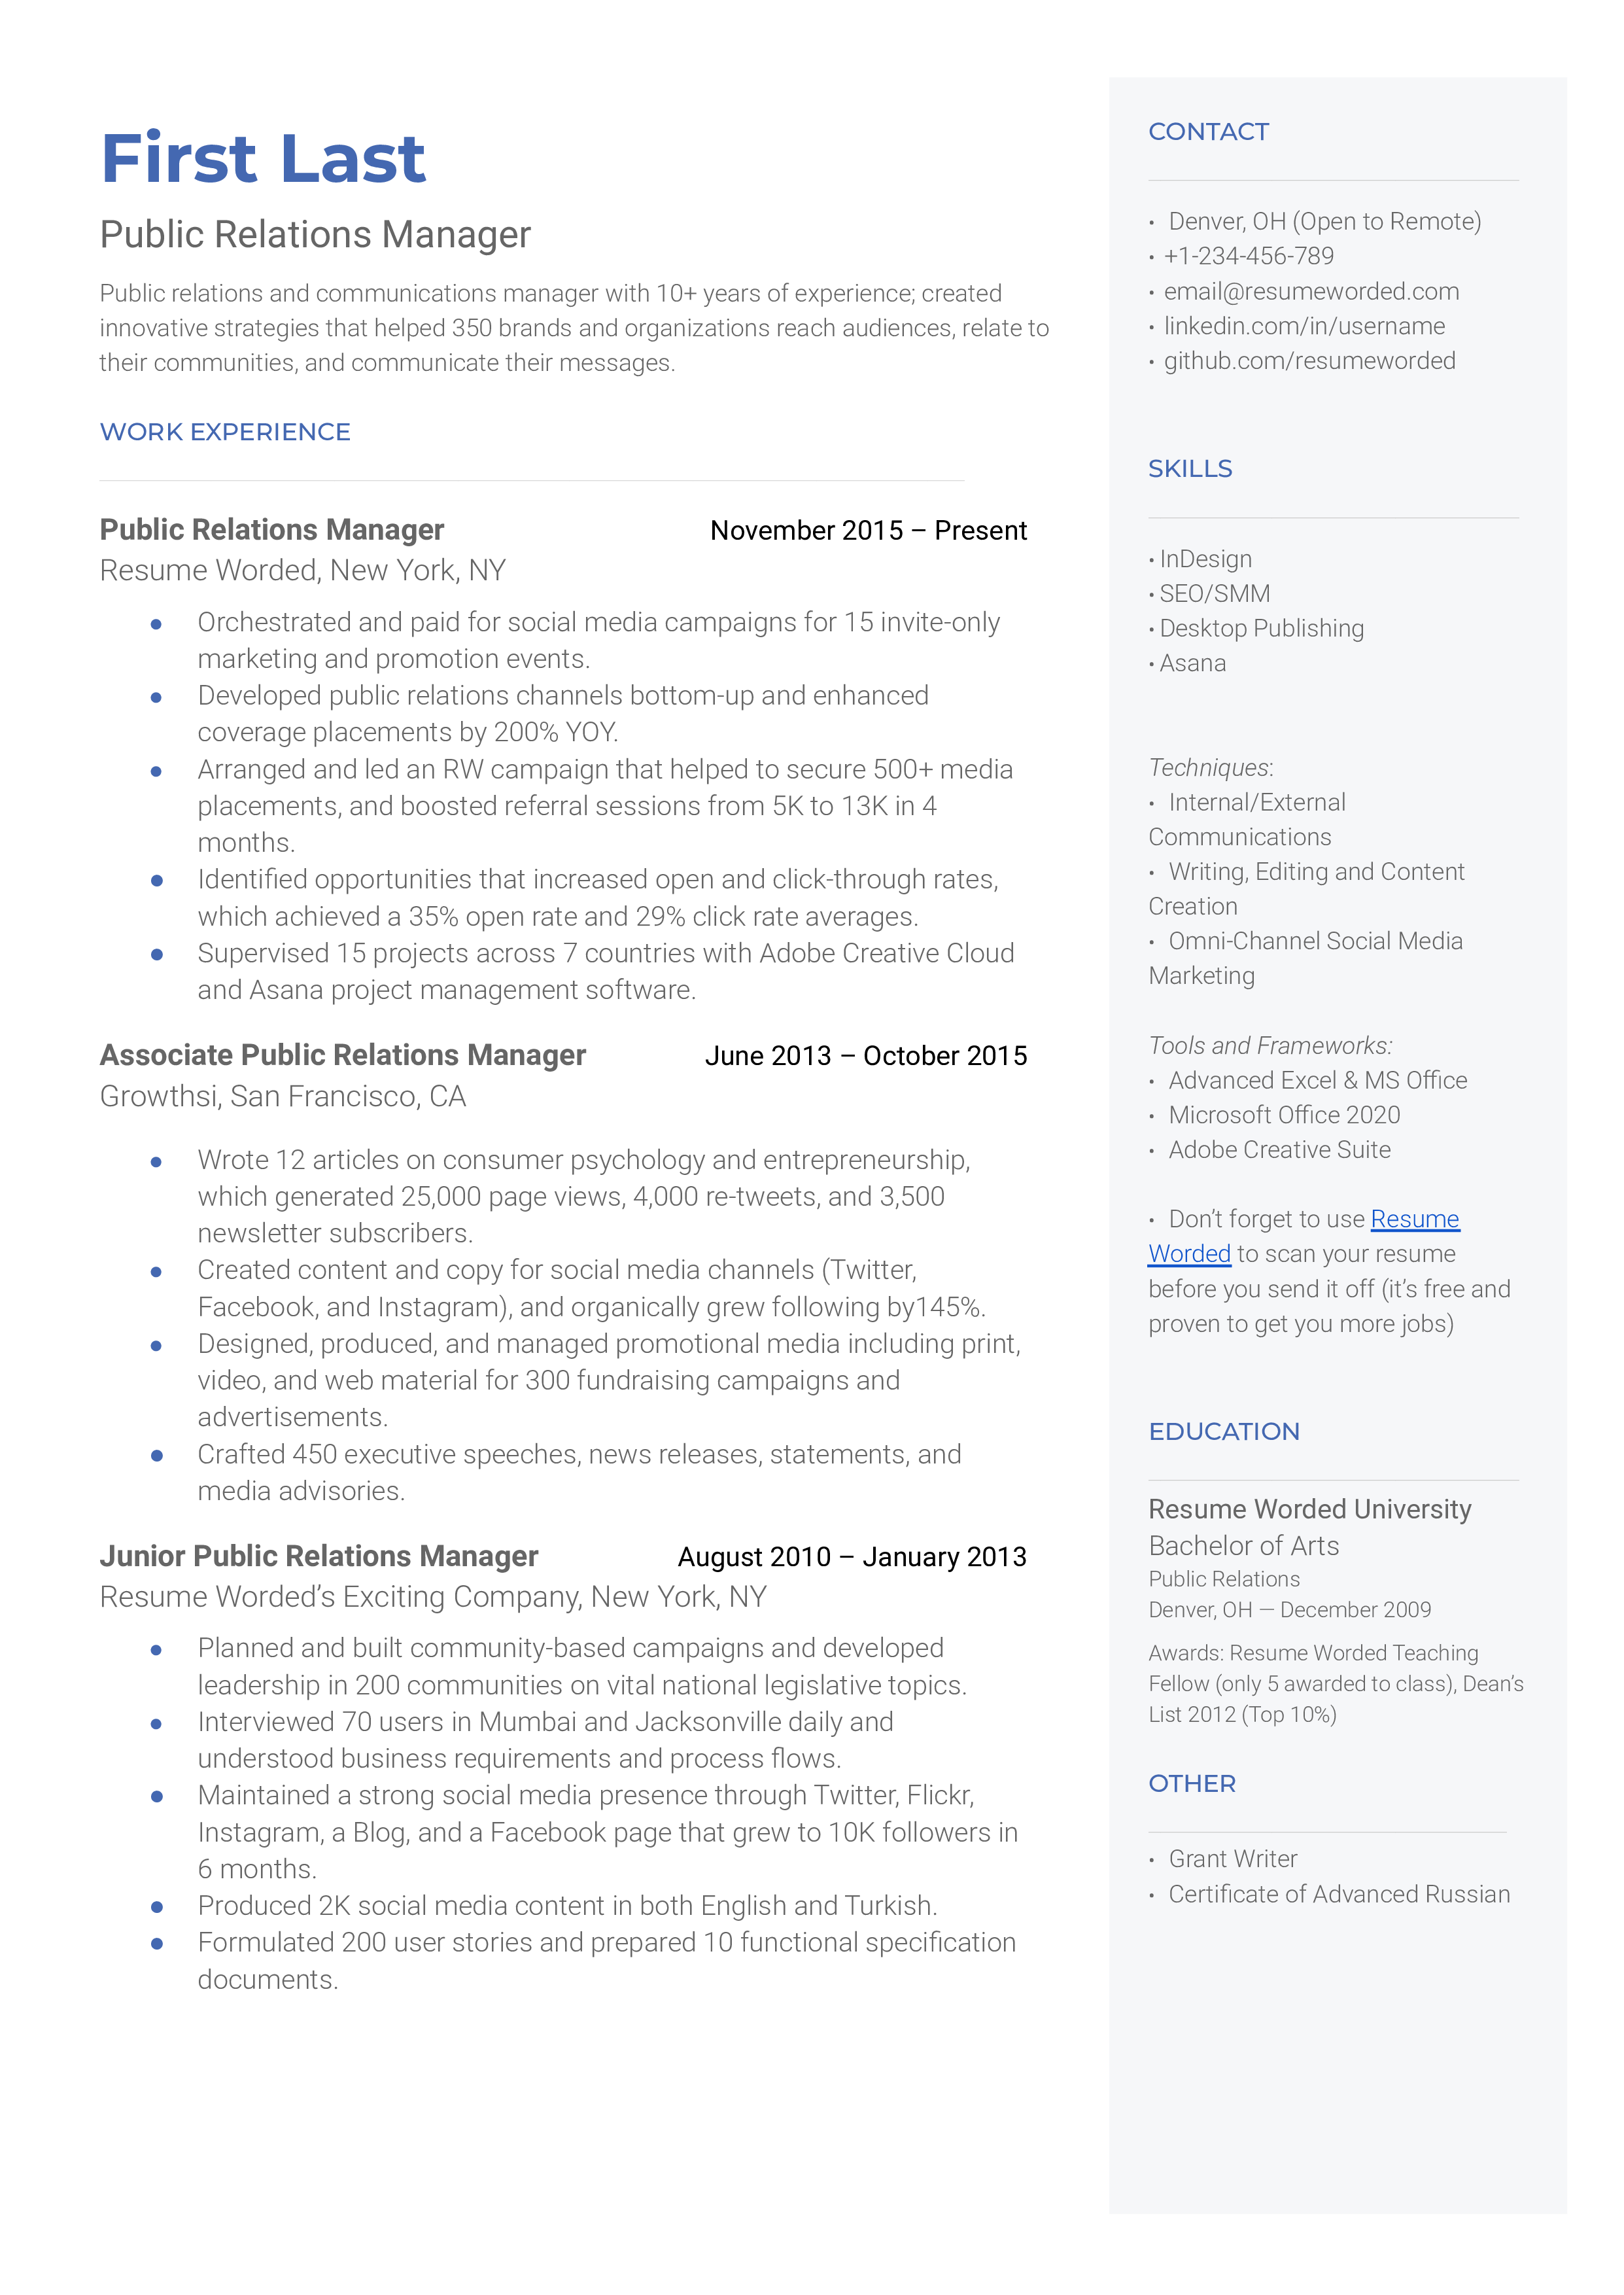 A detailed CV for a Public Relations Manager showcasing crisis management skills and data-driven strategies.